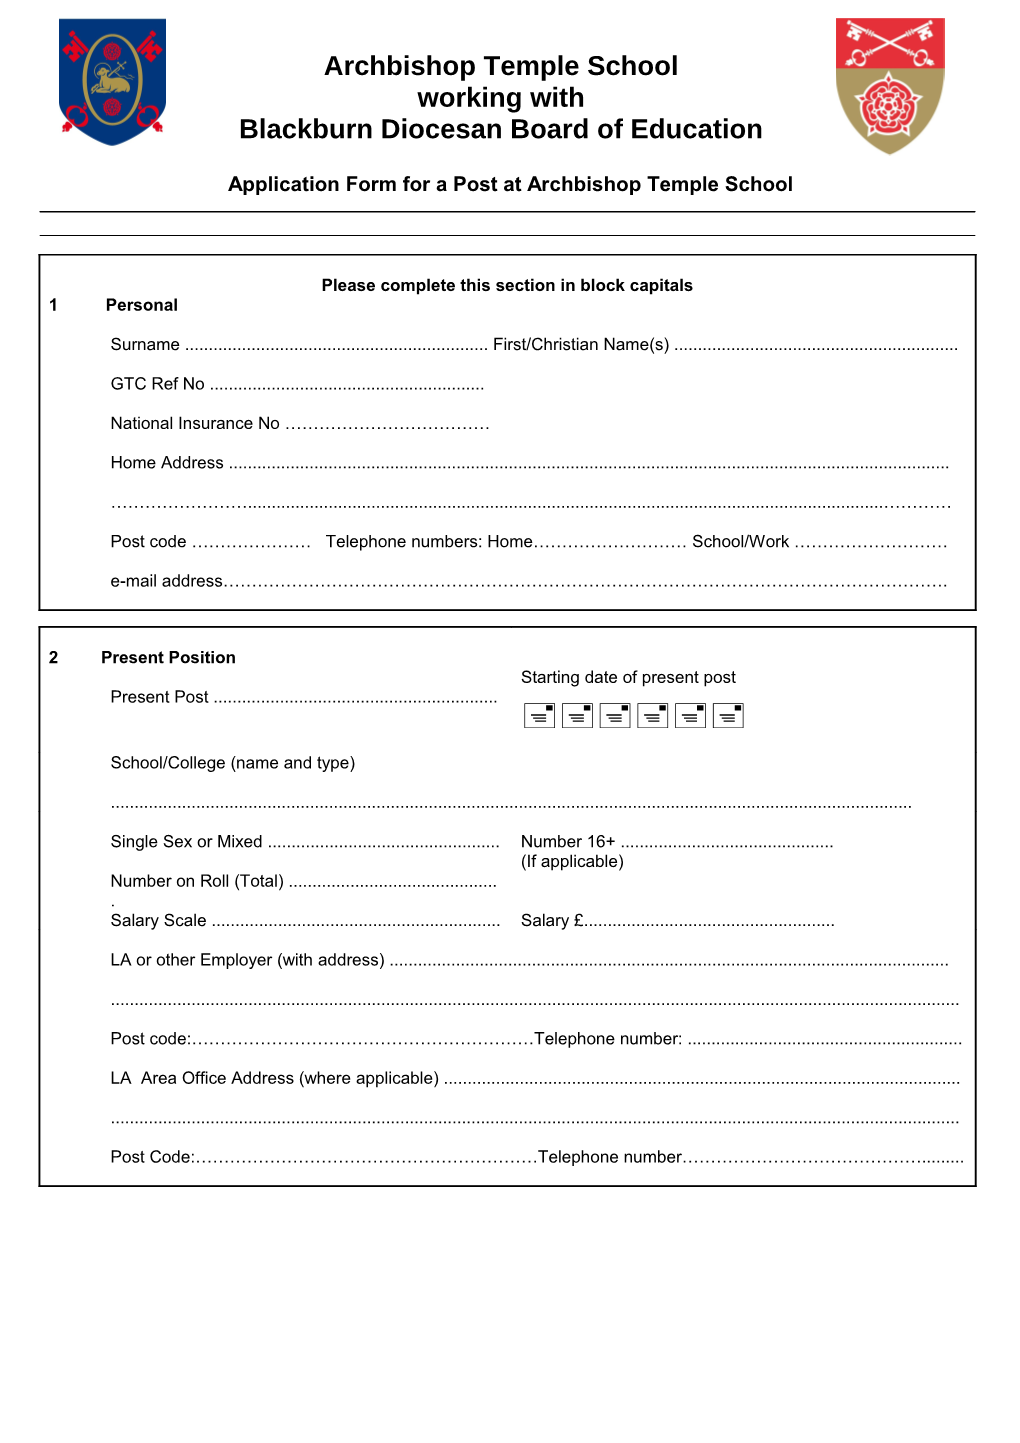 Application Form for a Post at Archbishop Temple School